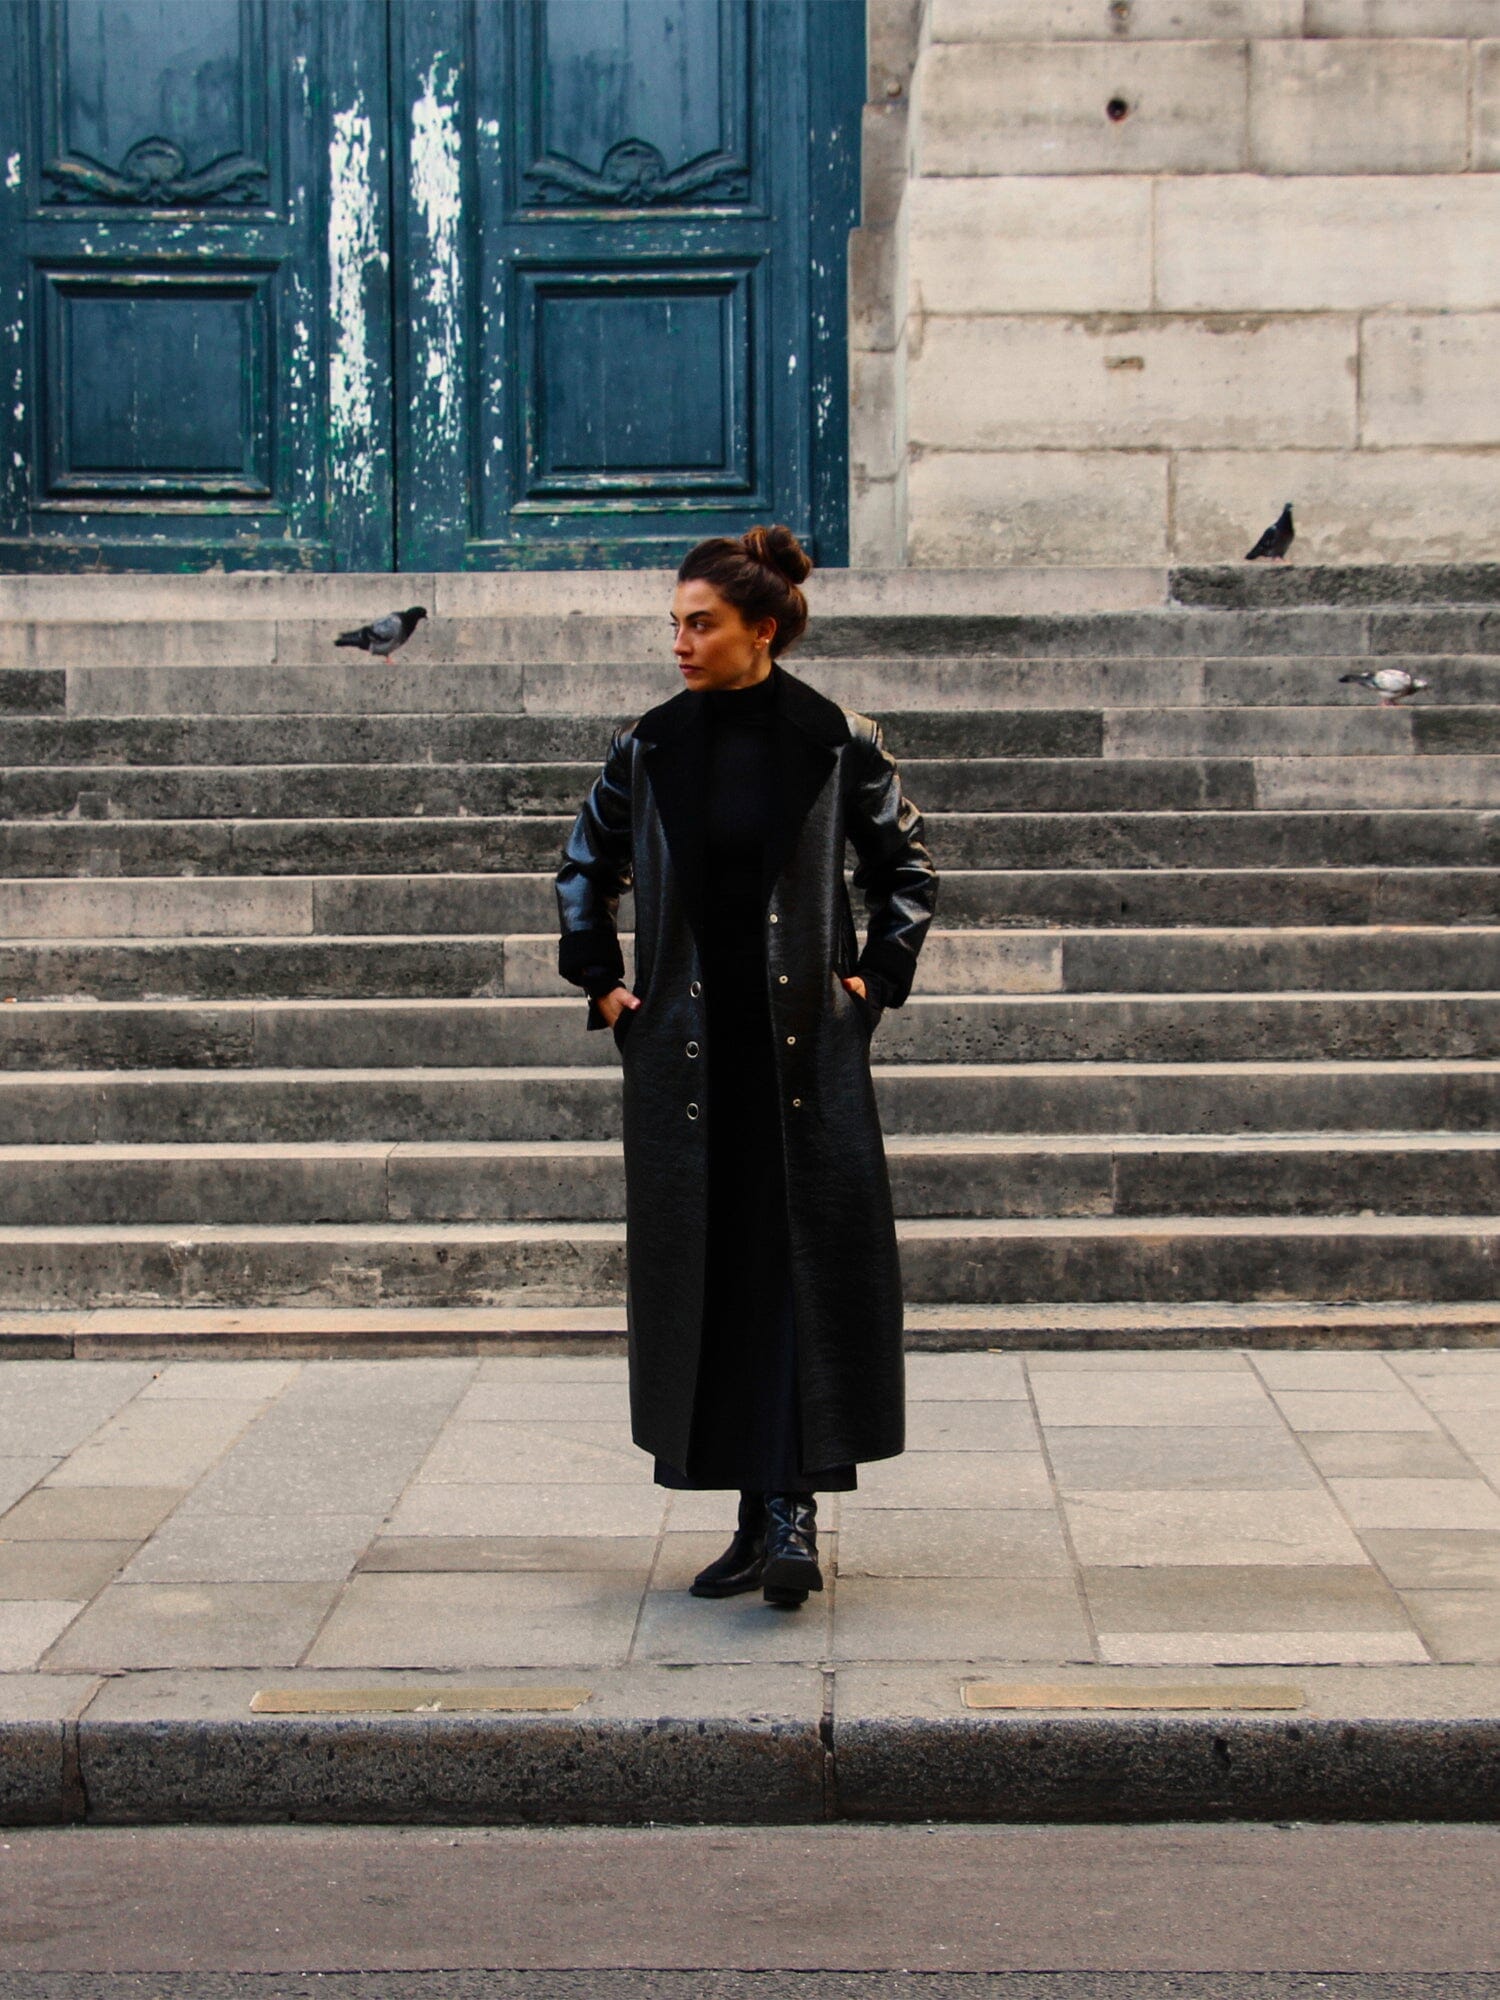 ACHAB - Long Coat with Vinyl and Shearling Inspiration Tailored Collar Black Coat Fête Impériale